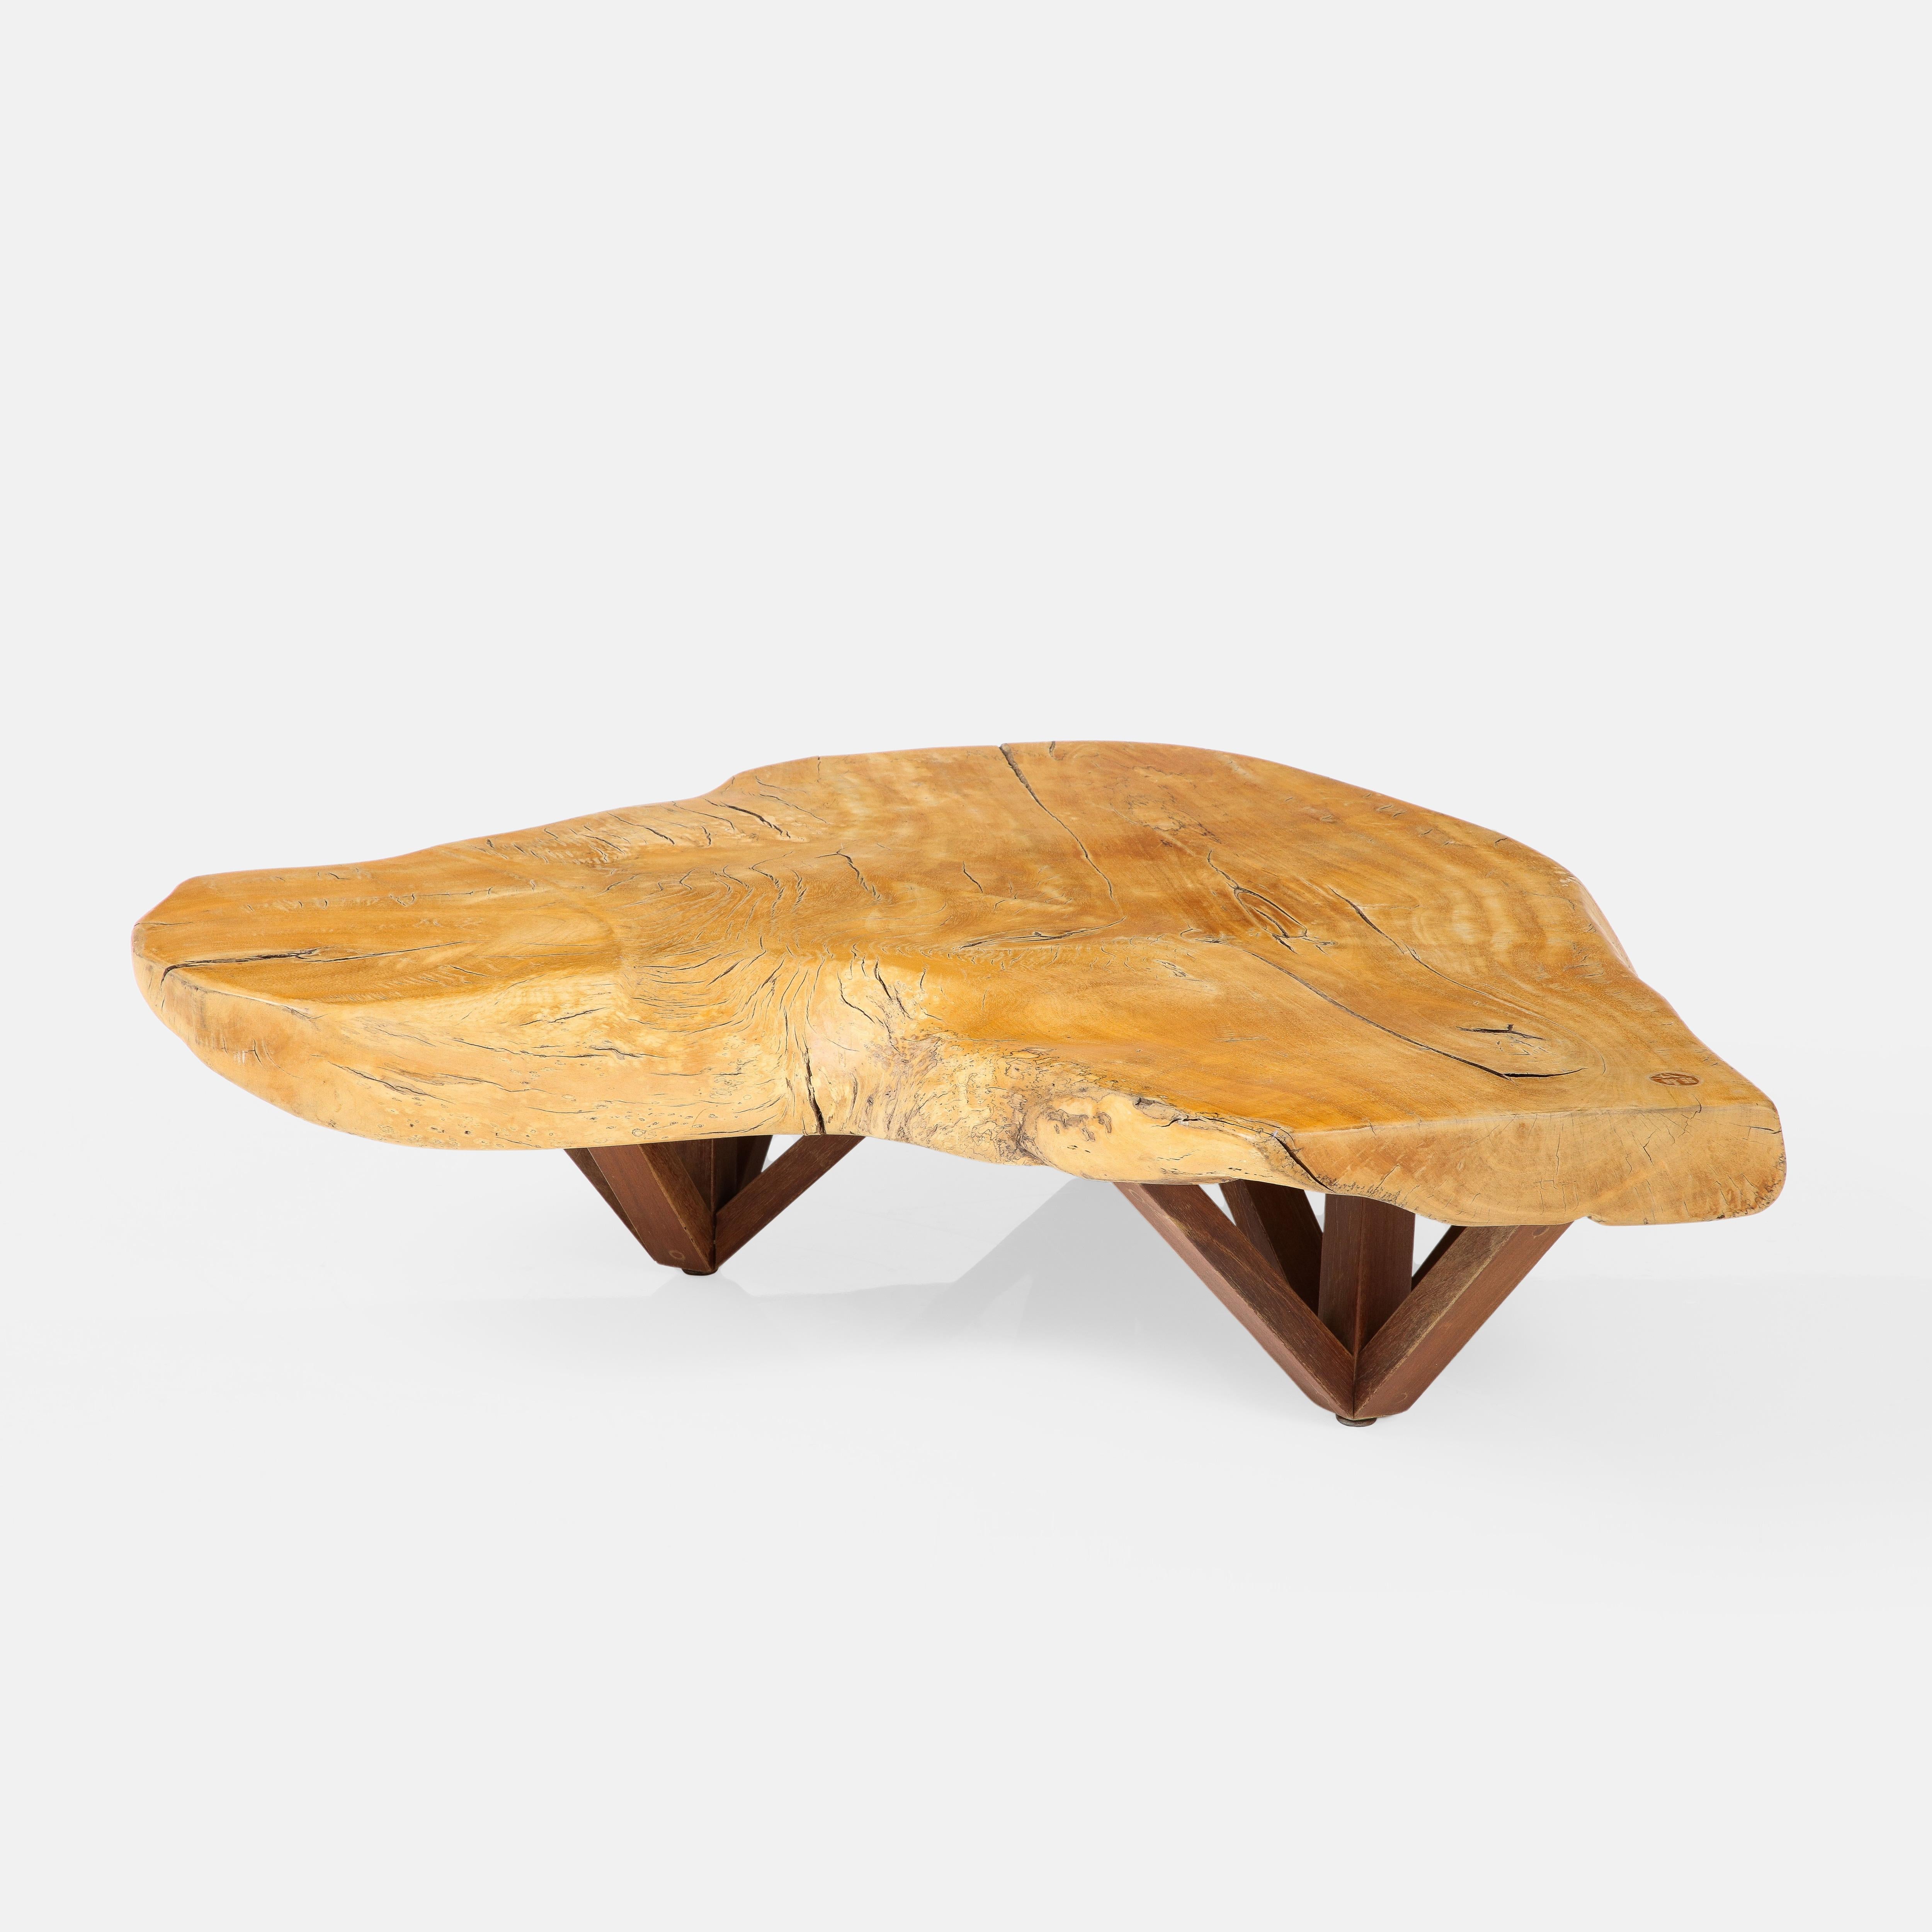 Hugo Franca and Paolo Alves coffee table with live edge slab of pequi wood atop three sets of architectural wood bases, Brazil, circa 2016. This impressive and unique coffee table came from Hugo Franca's own private collection. 
Impressed signature